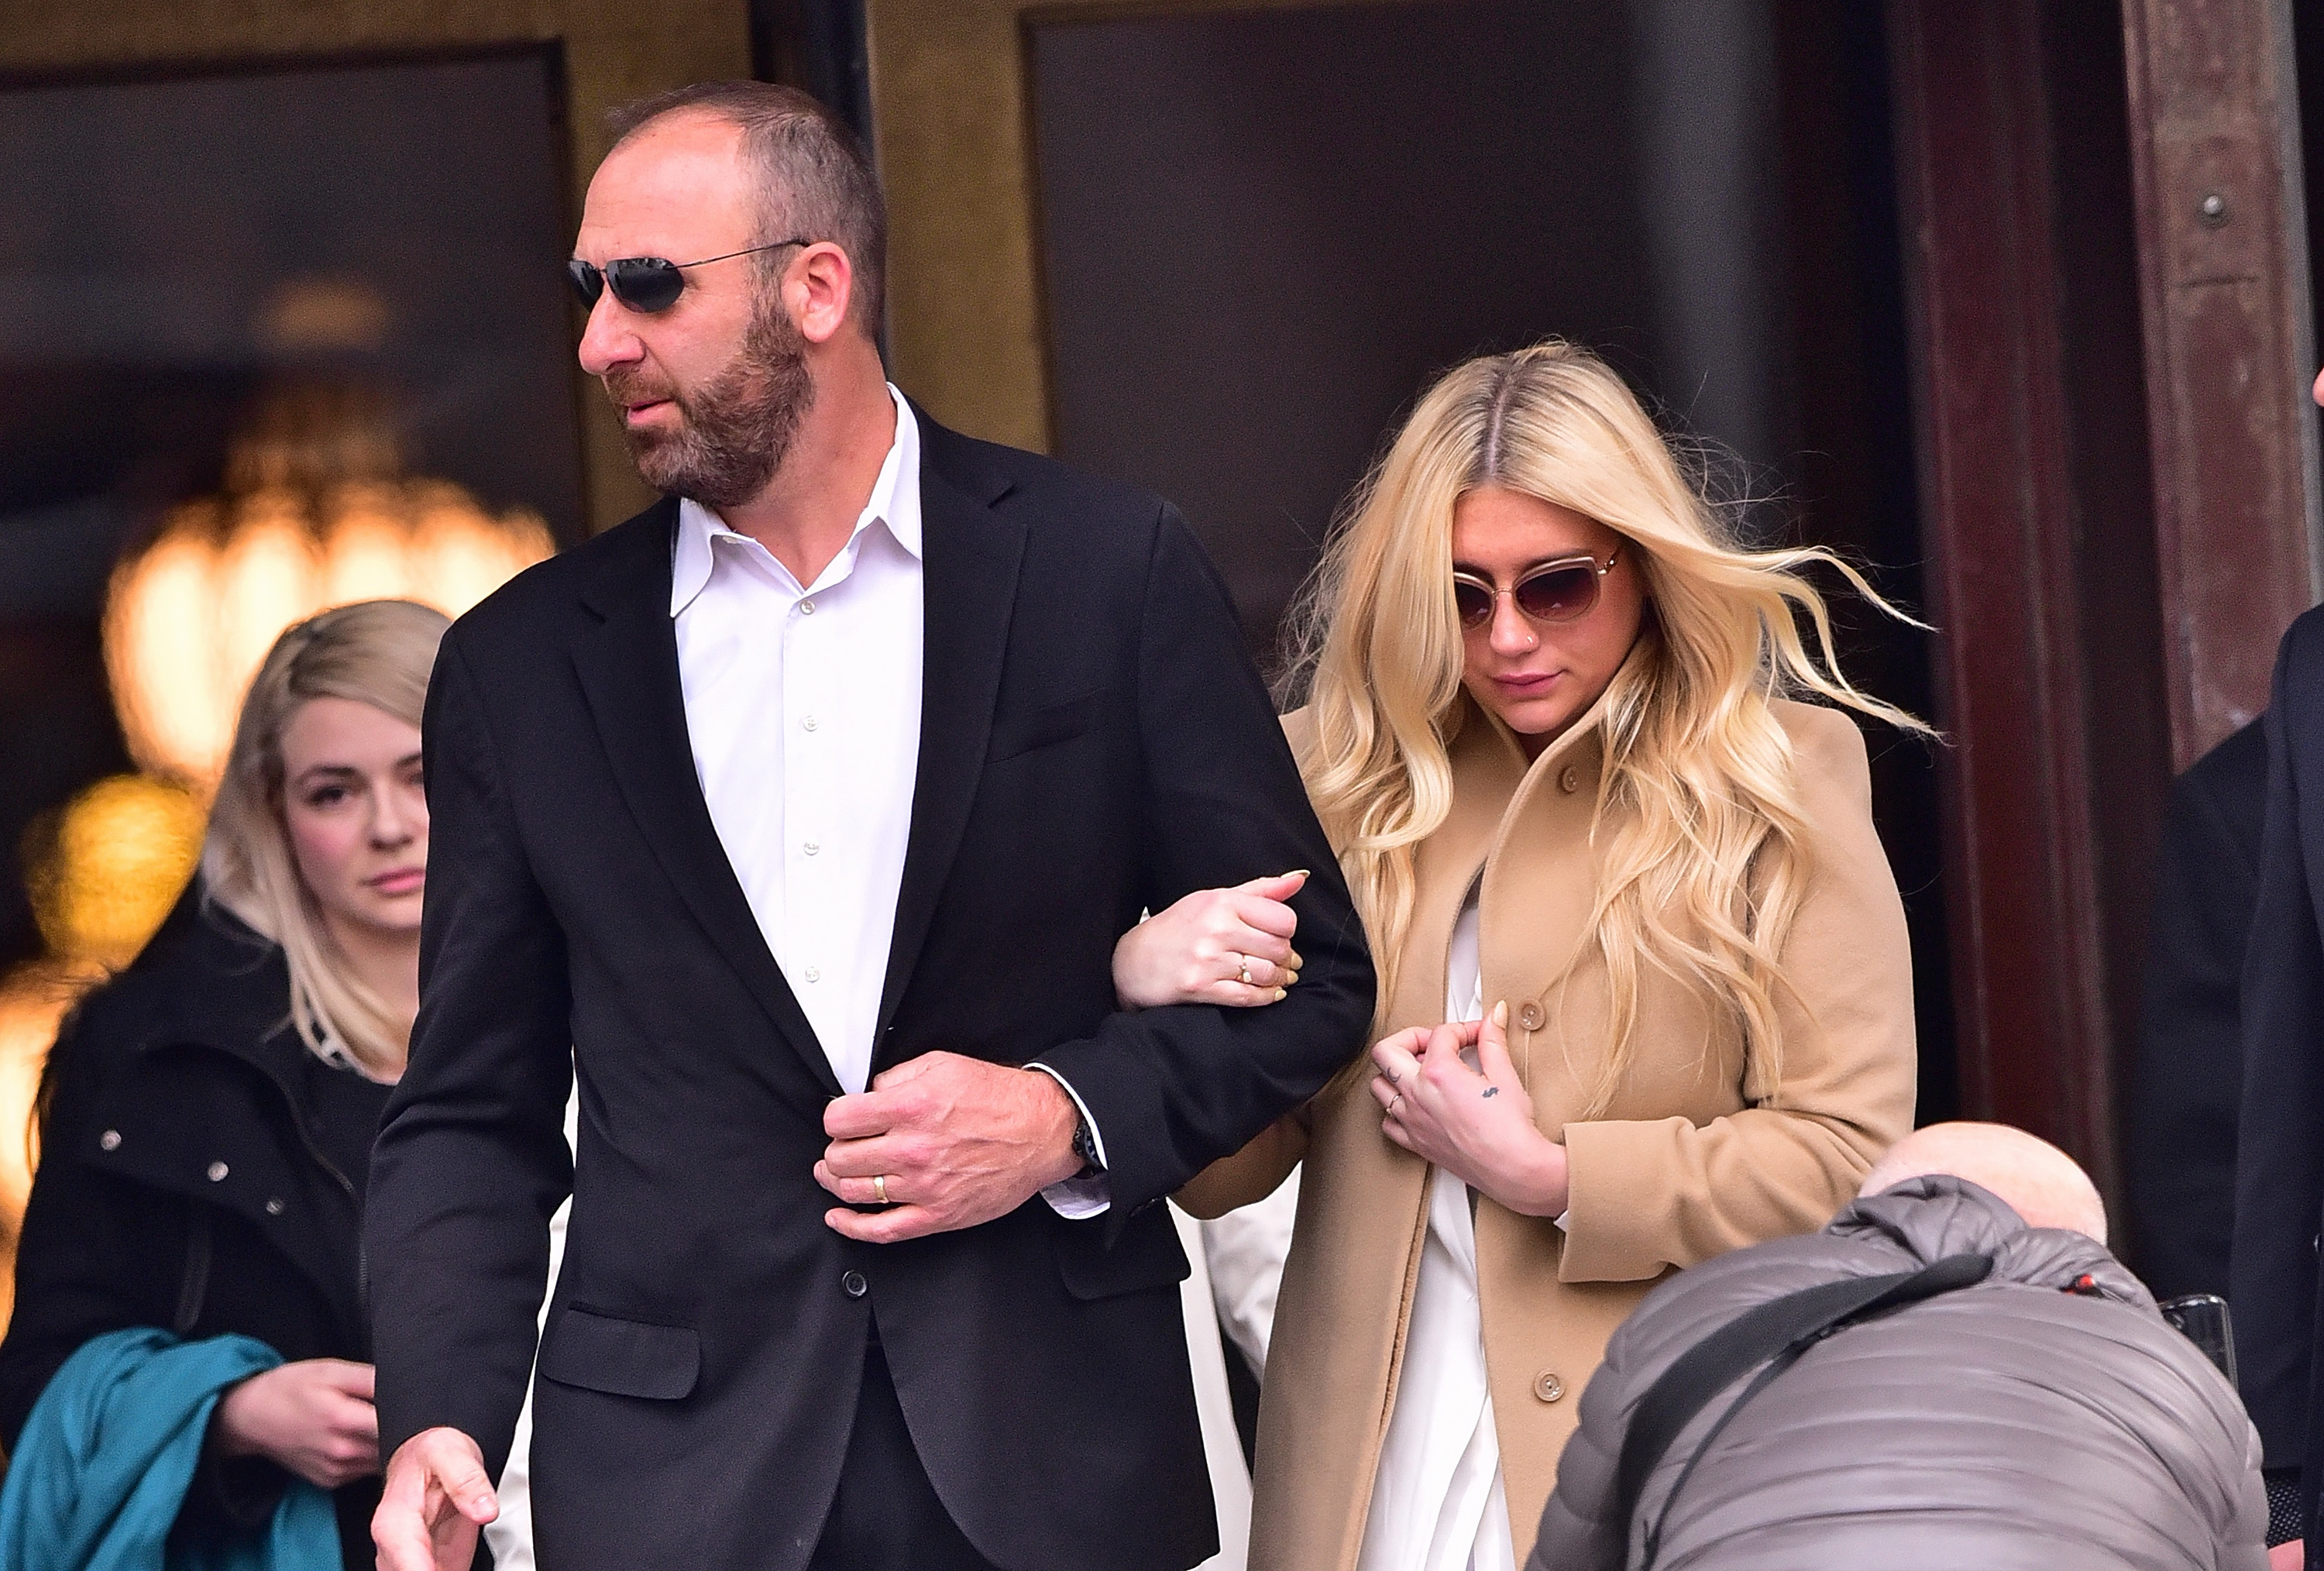 Kesha leaves the New York State Supreme Court on February 19, 2016 in New York City. (James Devaney/Getty Images)